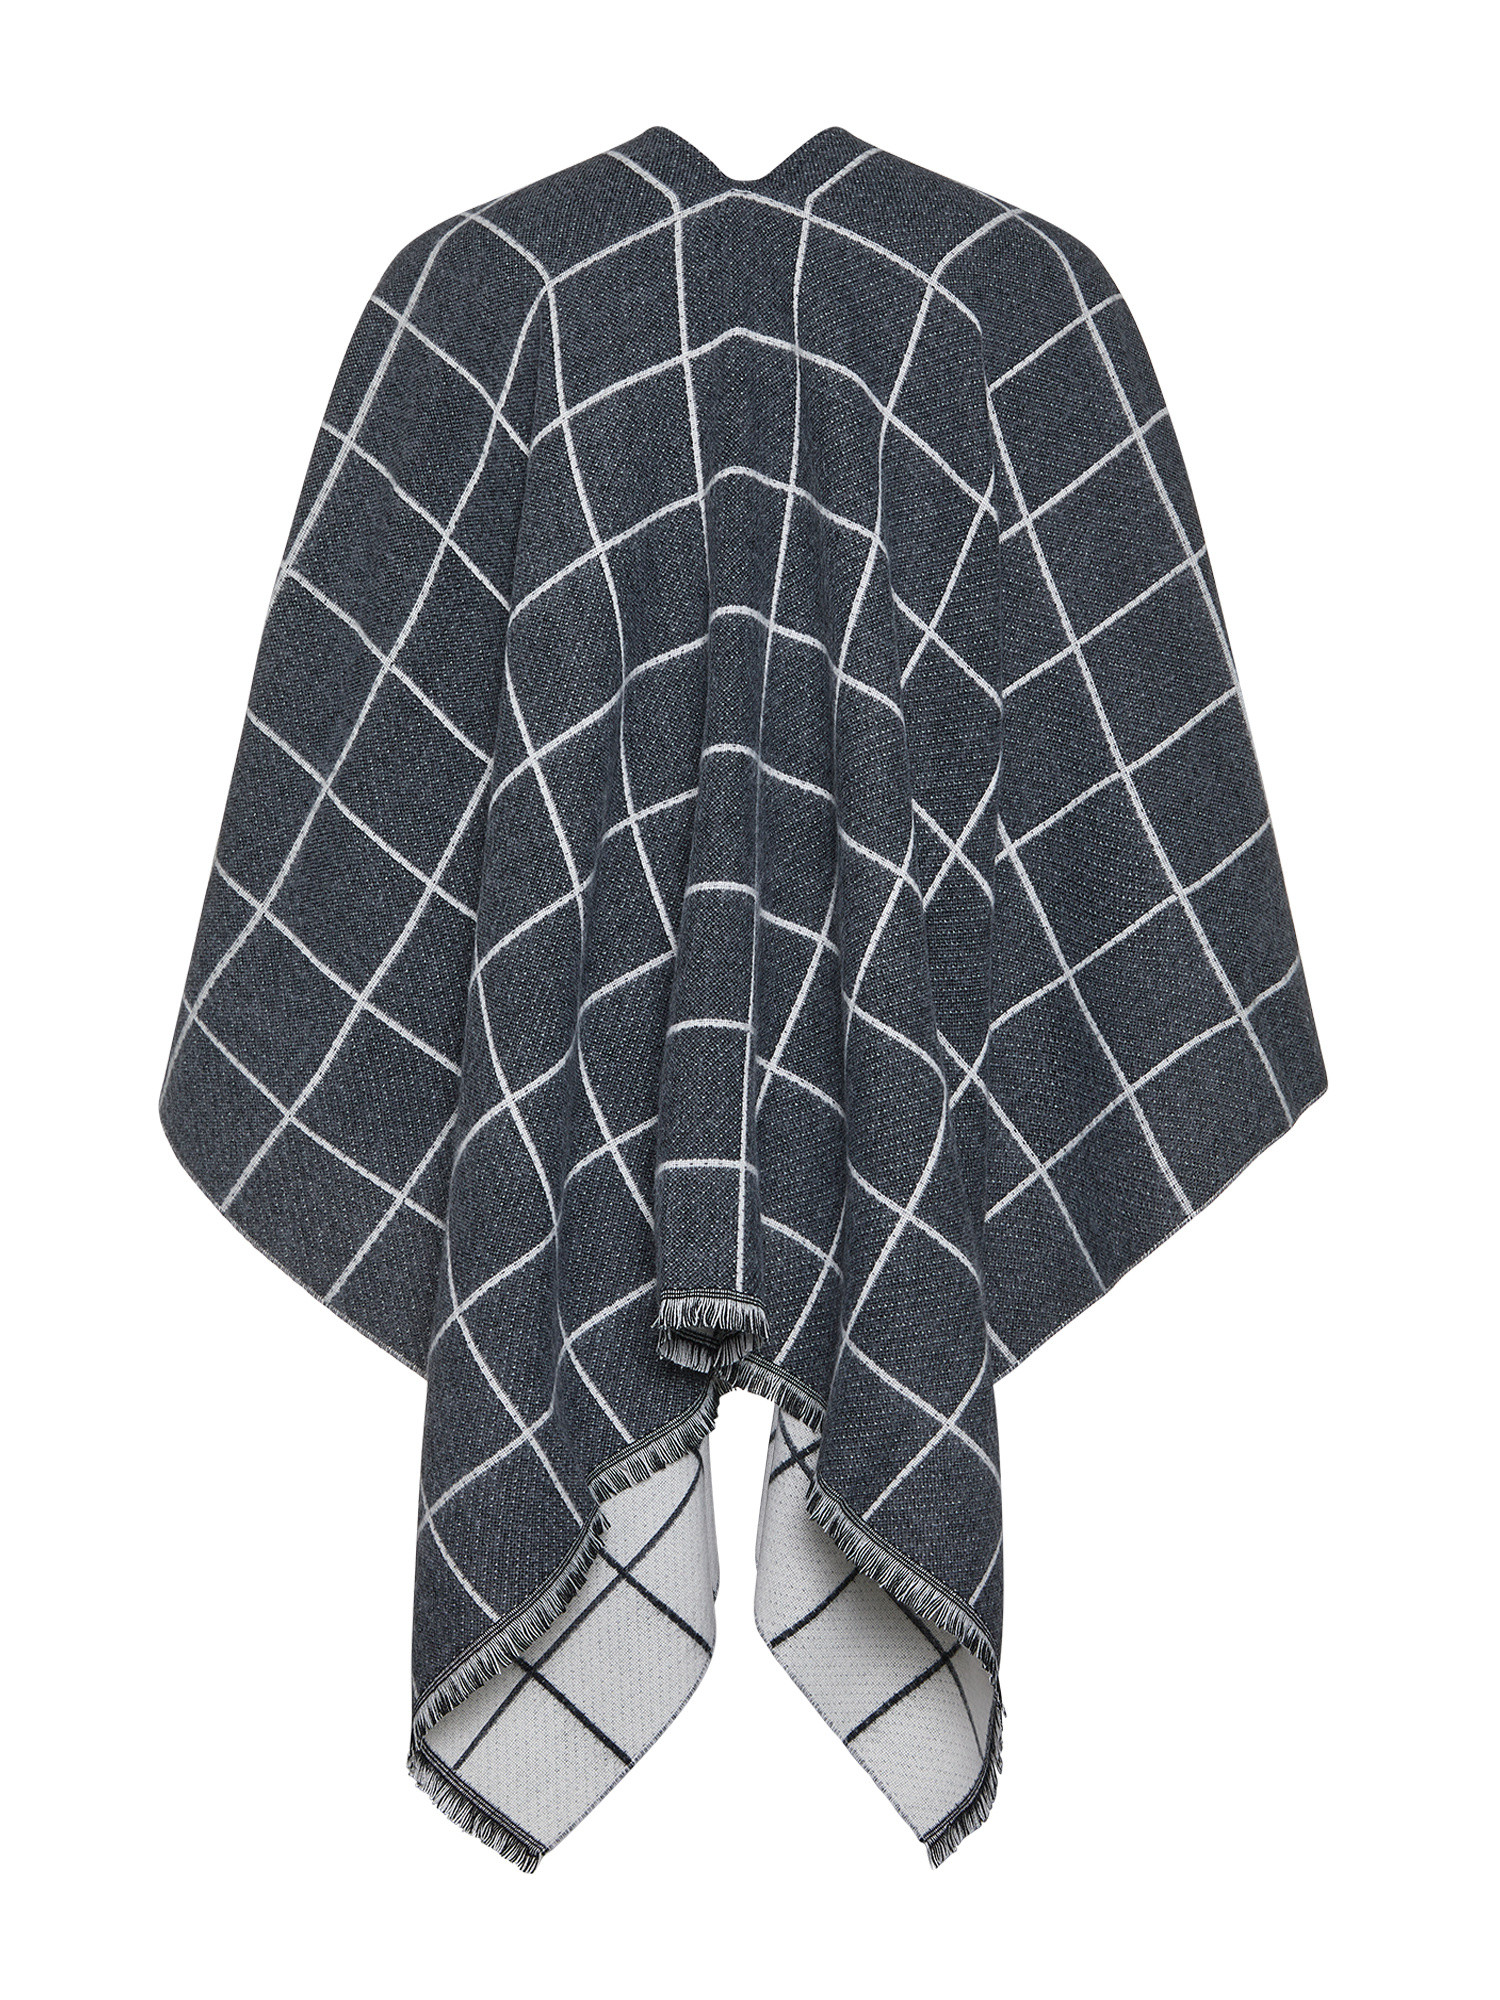 Koan - Checked cape, Grey, large image number 1